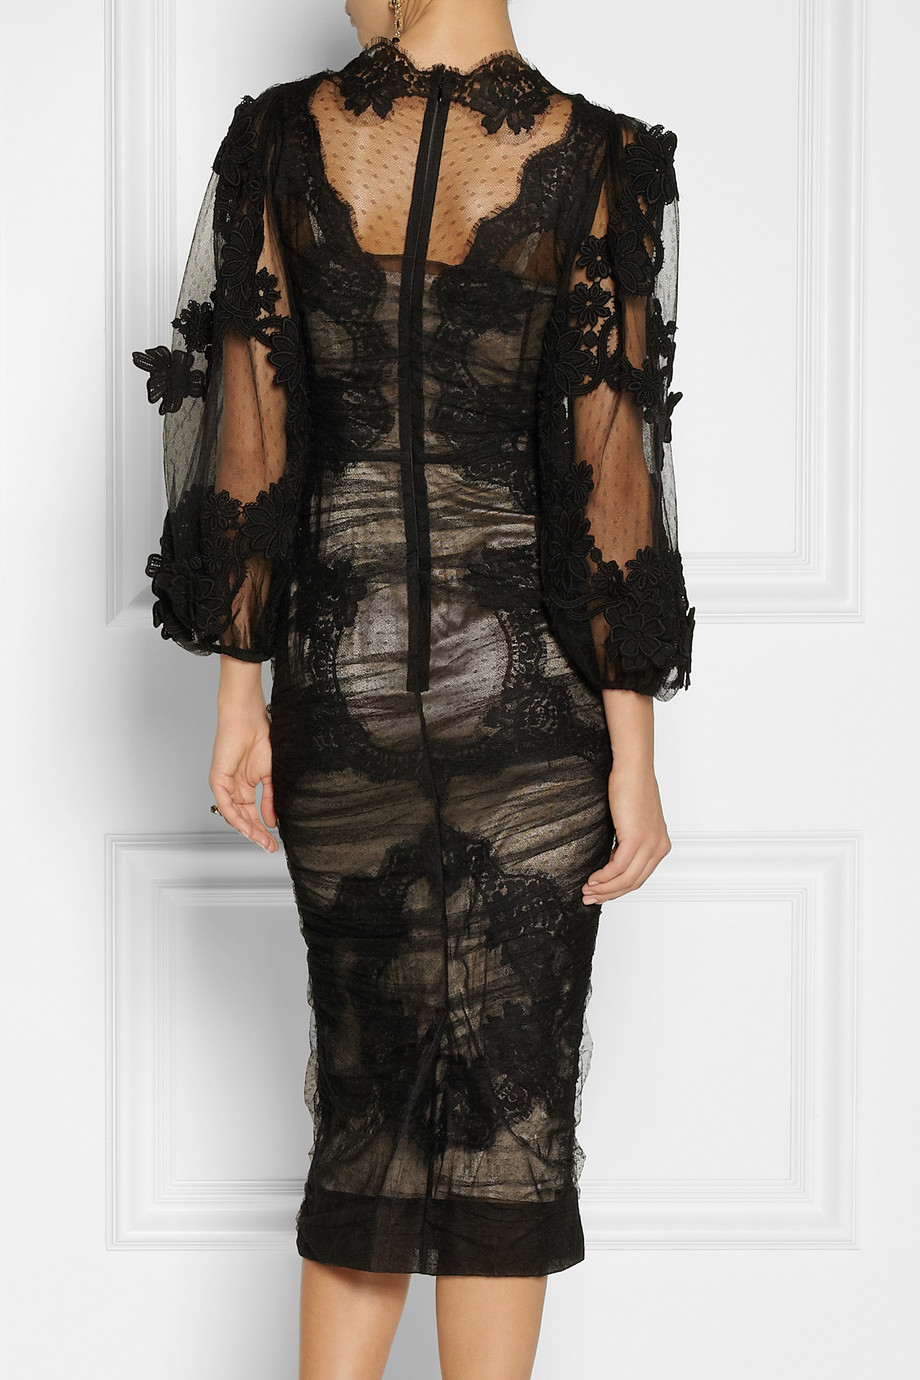 Lyst Dolce And Gabbana Ruched Lace And Tulle Dress In Black 1374